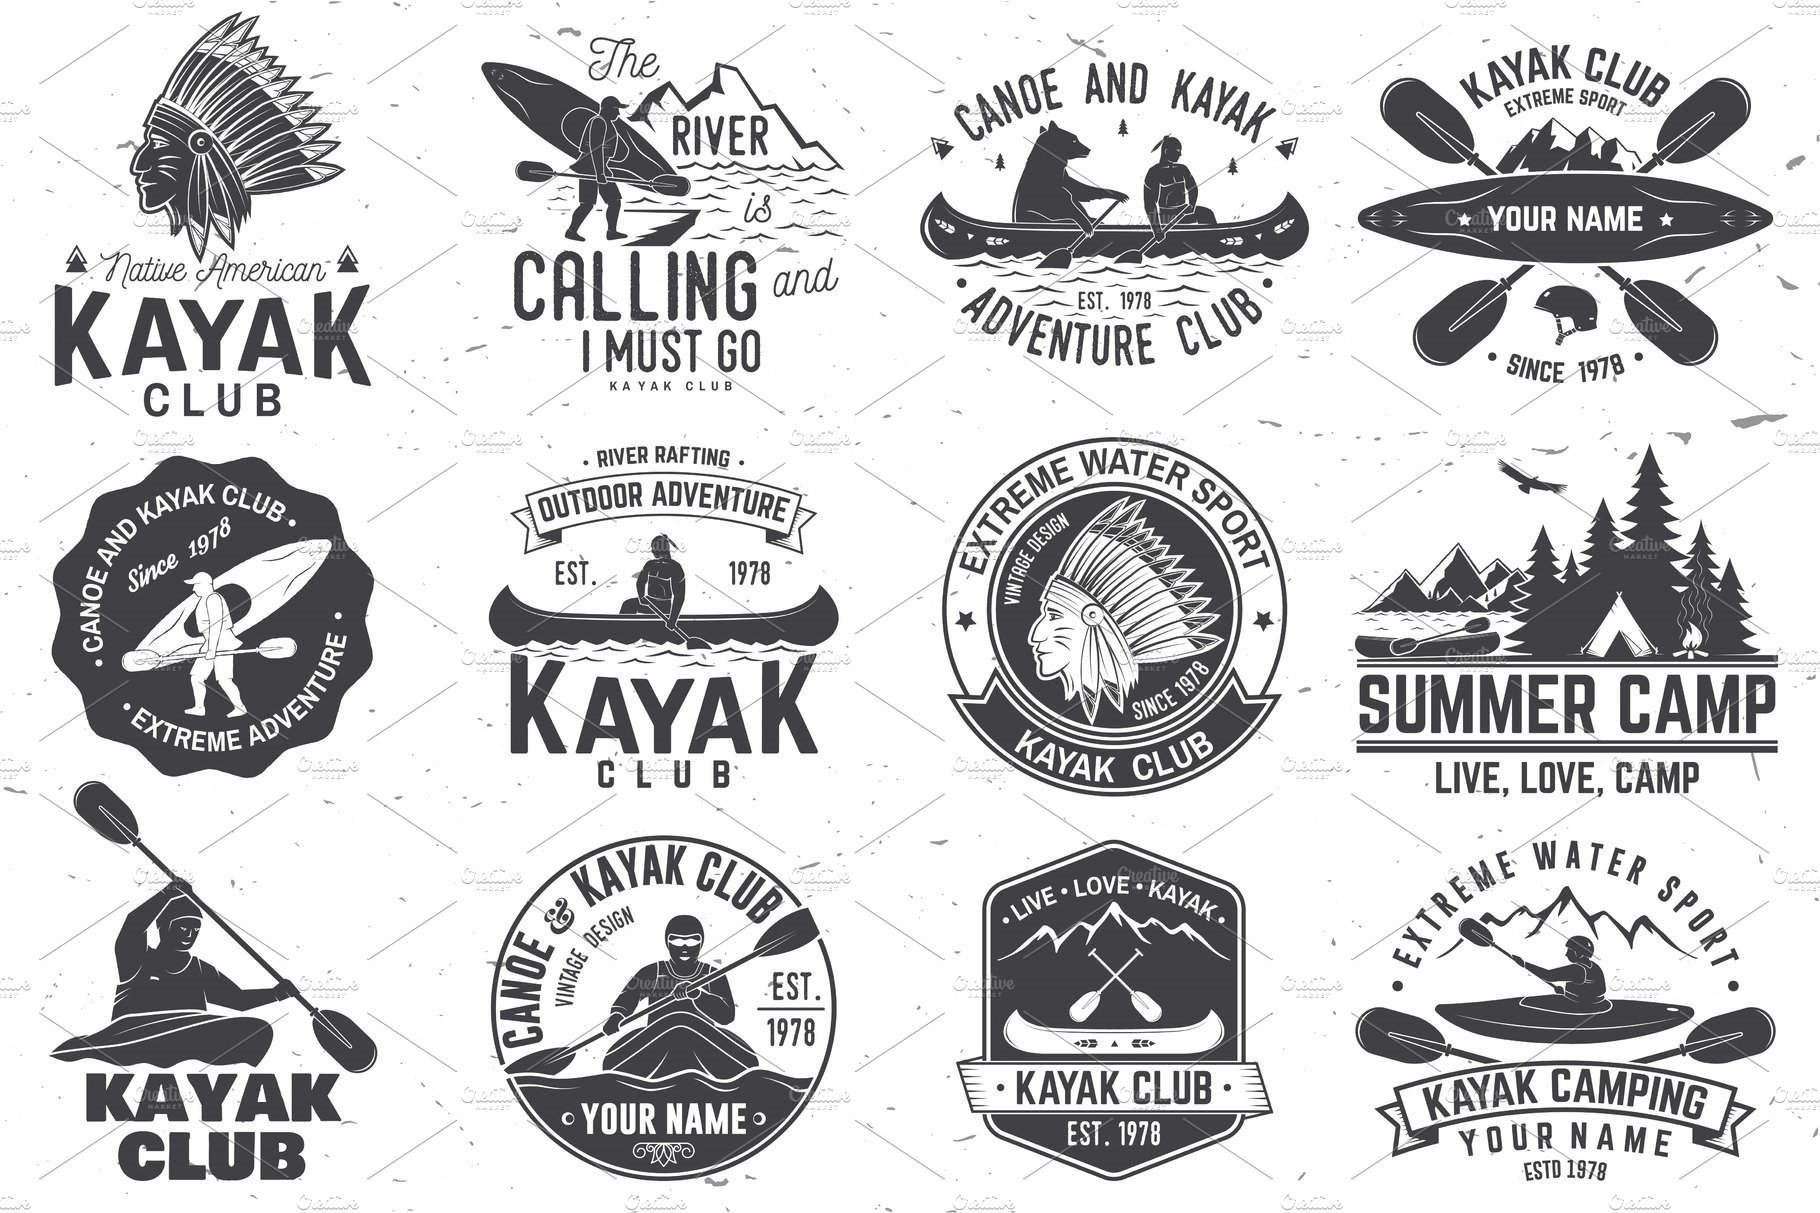 Canoe and kayak club badges cover image.